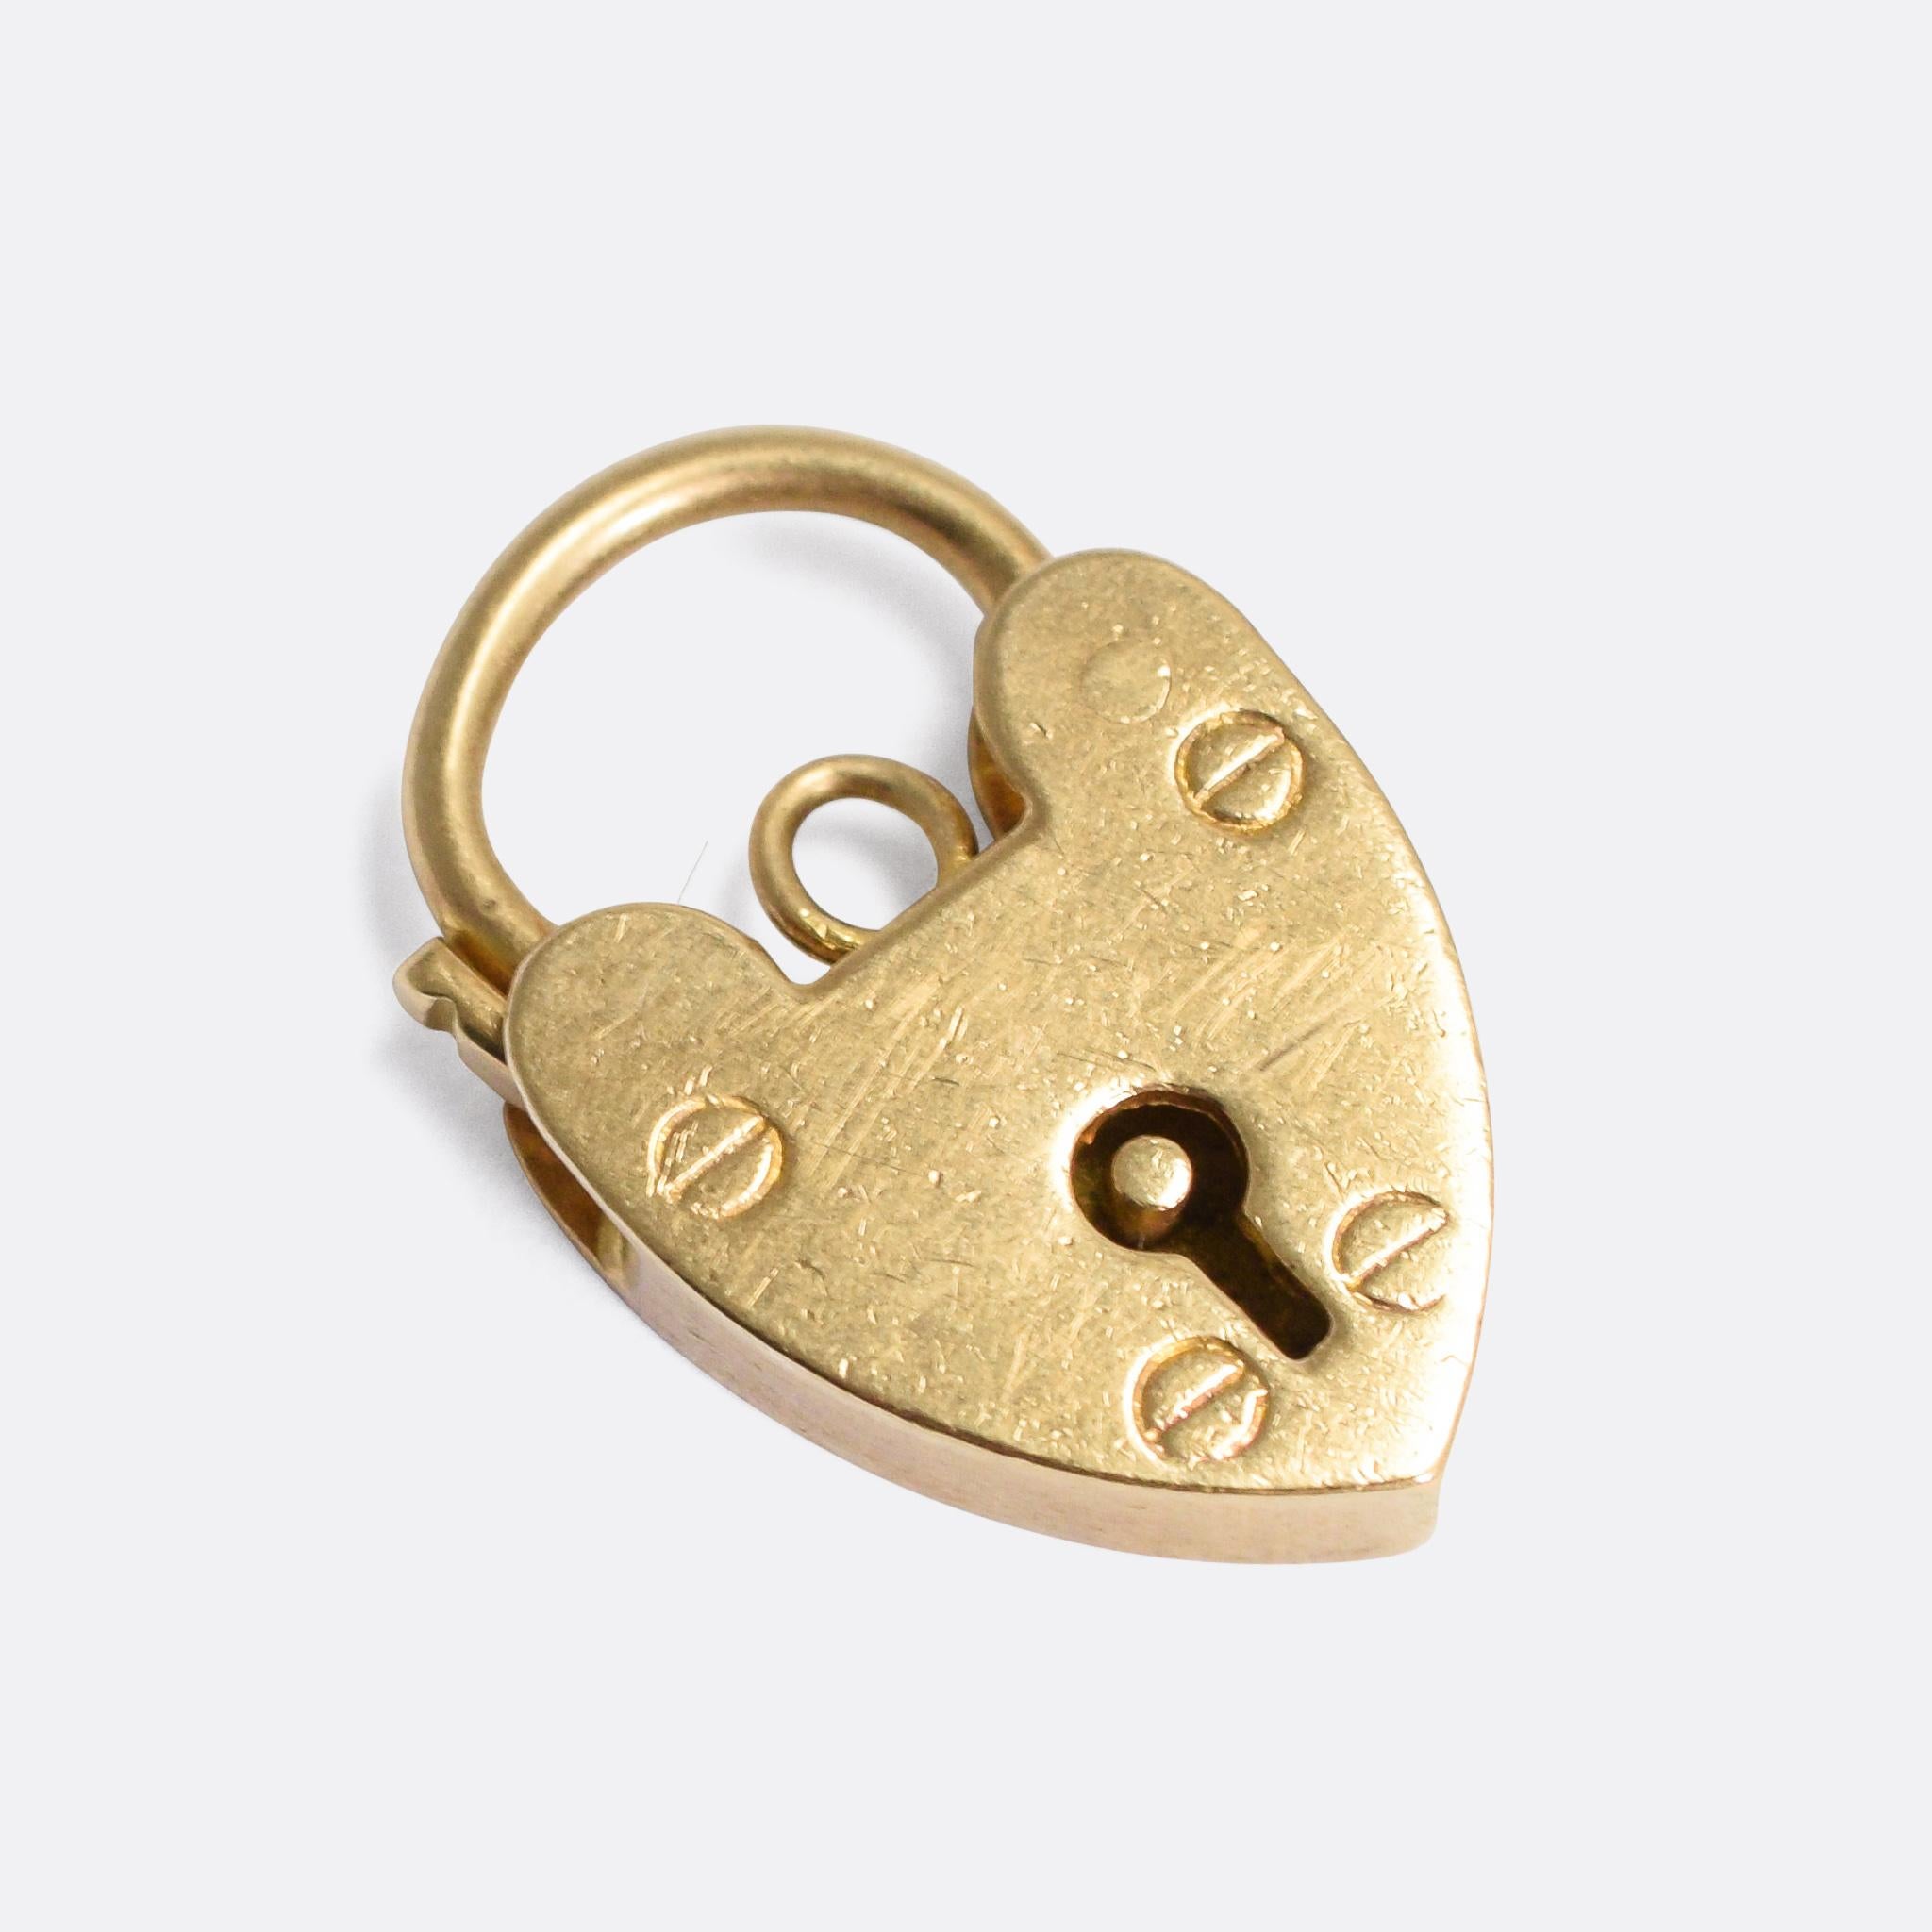 A sweet antique heart padlock dating from the turn of the 20th Century. It would likely have been created as a bracelet clasp, but looks equally great worn as a pendant or as part of a charm collection.

MEASUREMENTS 
1.8 x 1.2cm

WEIGHT